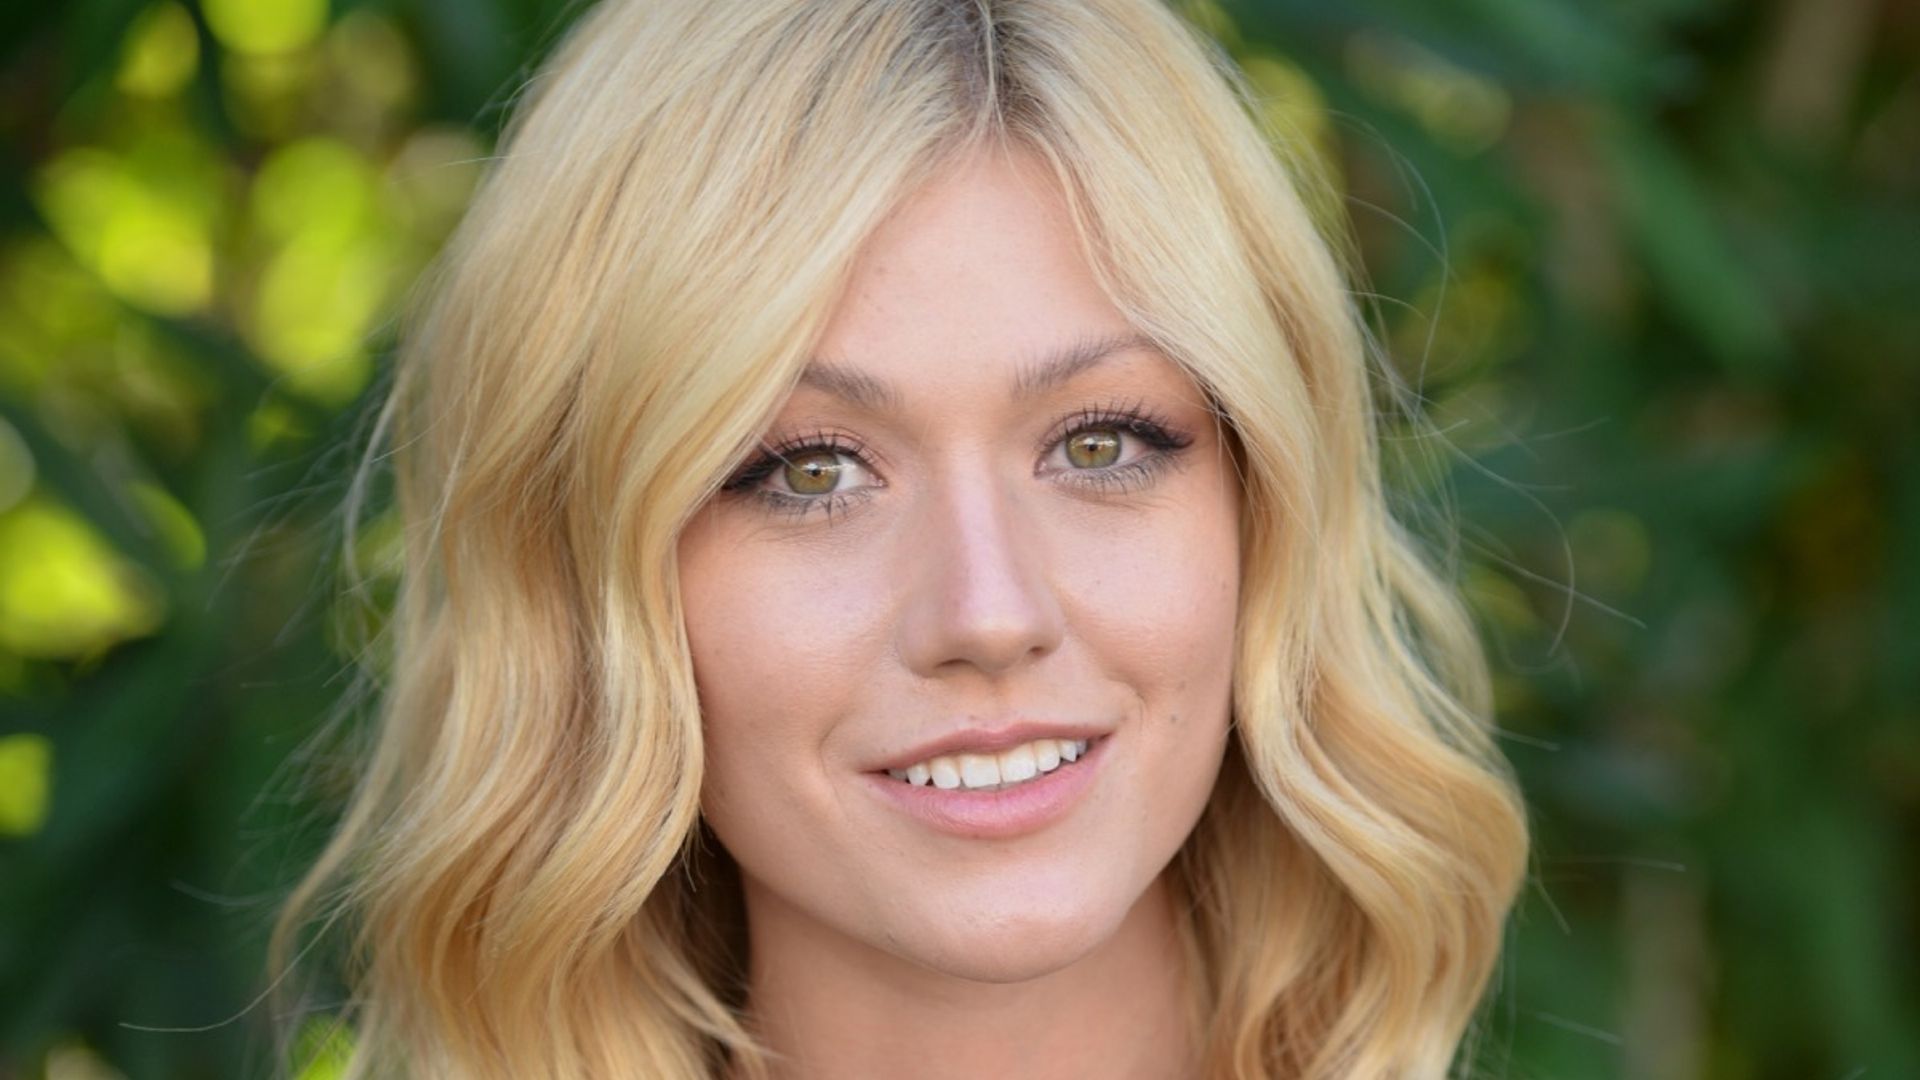 Arrow and Shadowhunters star Kat McNamara takes lead in CW's Walker spin-off